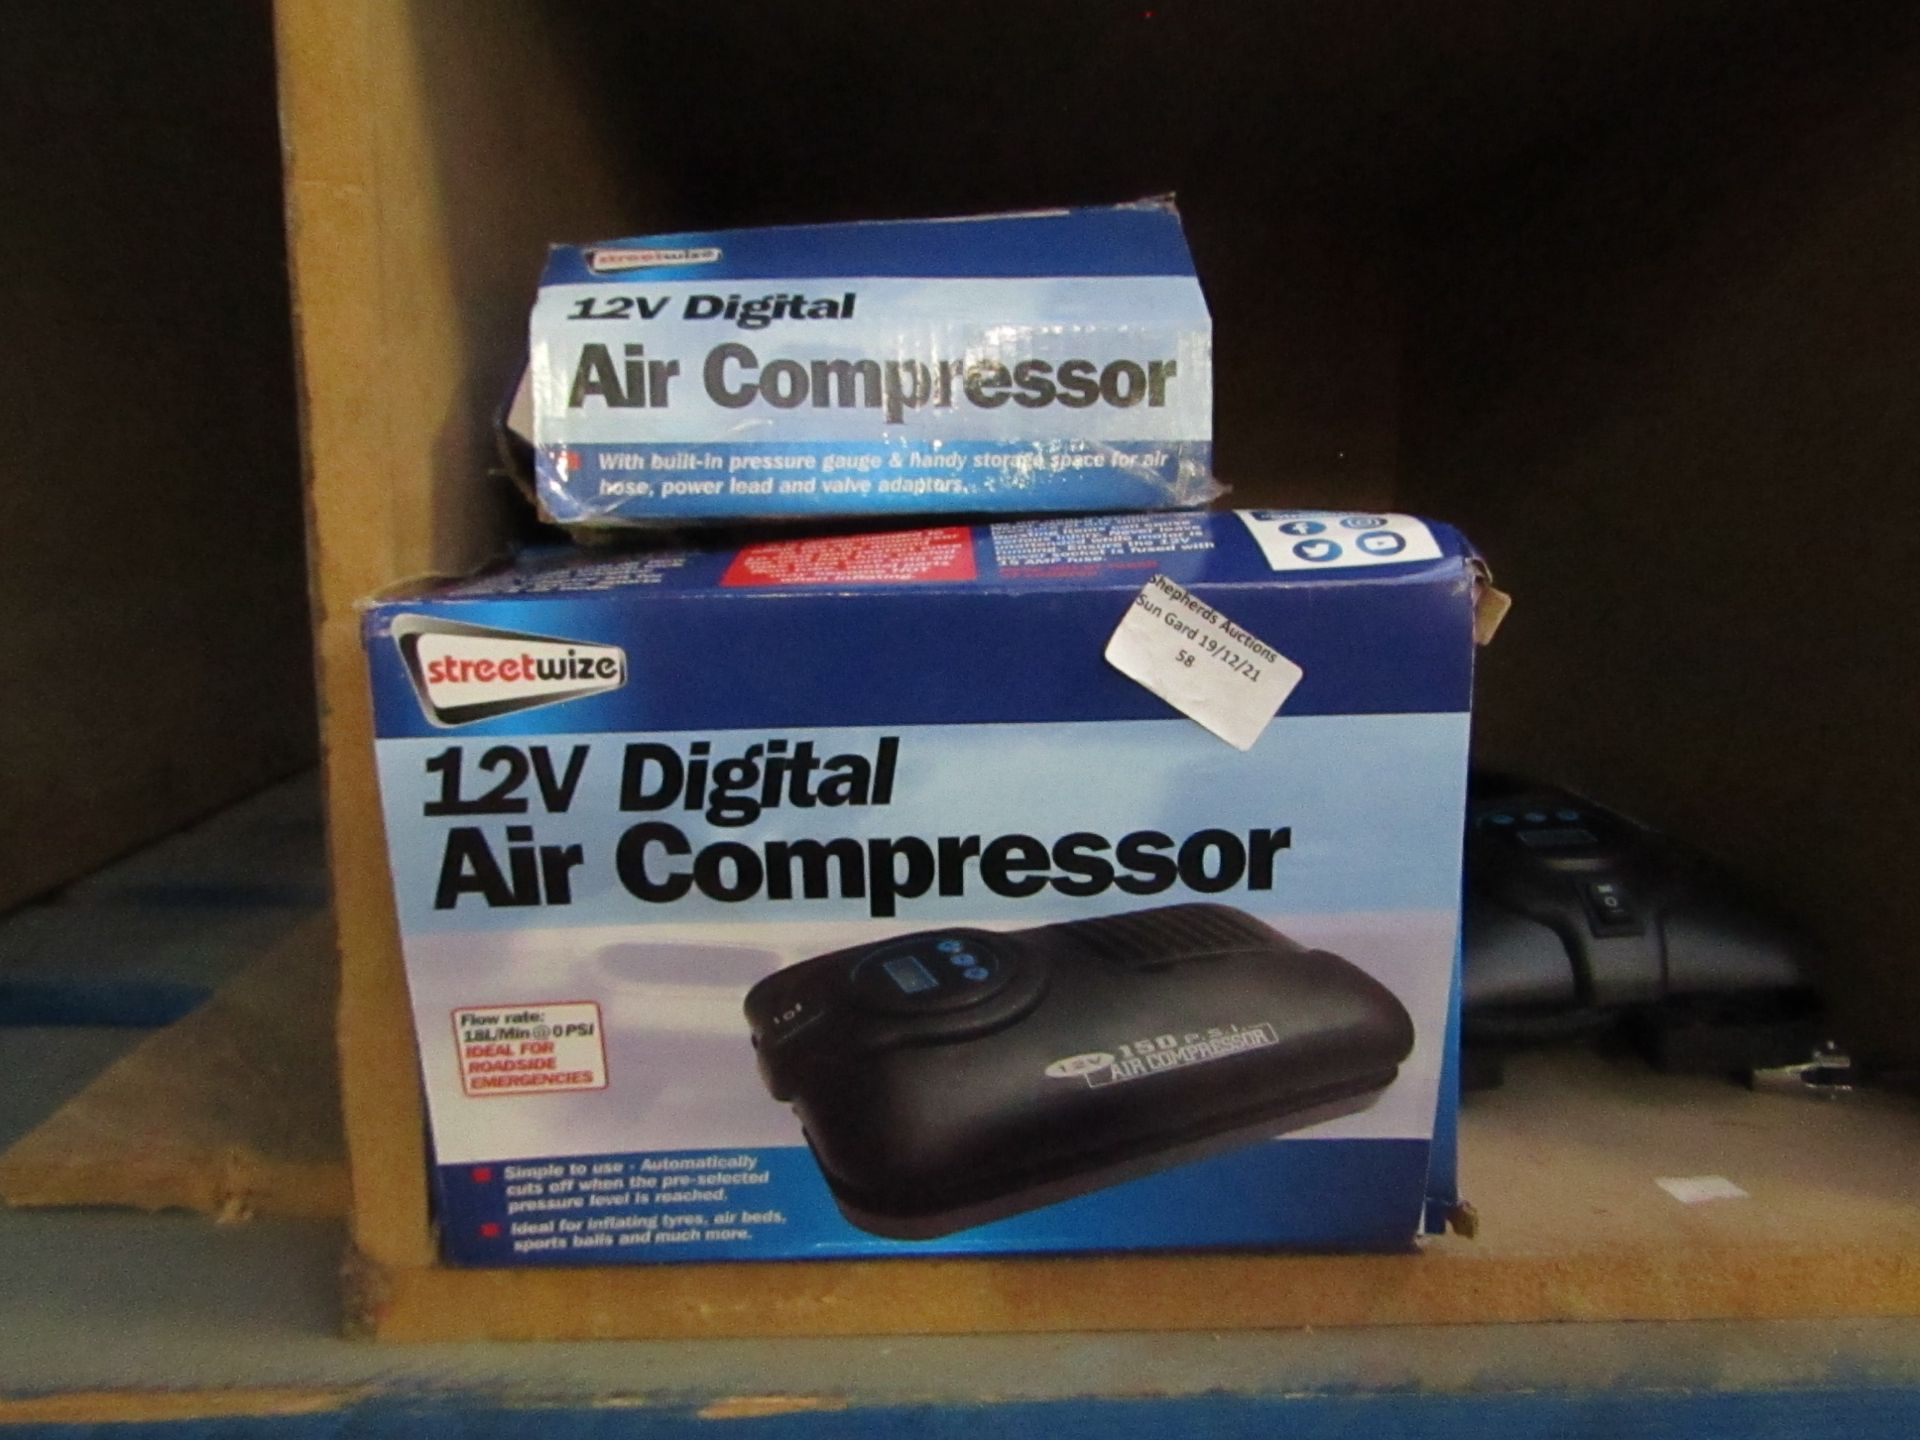 8x Streetwize 12v Digital Air Compressor, Unchecked & Boxed.